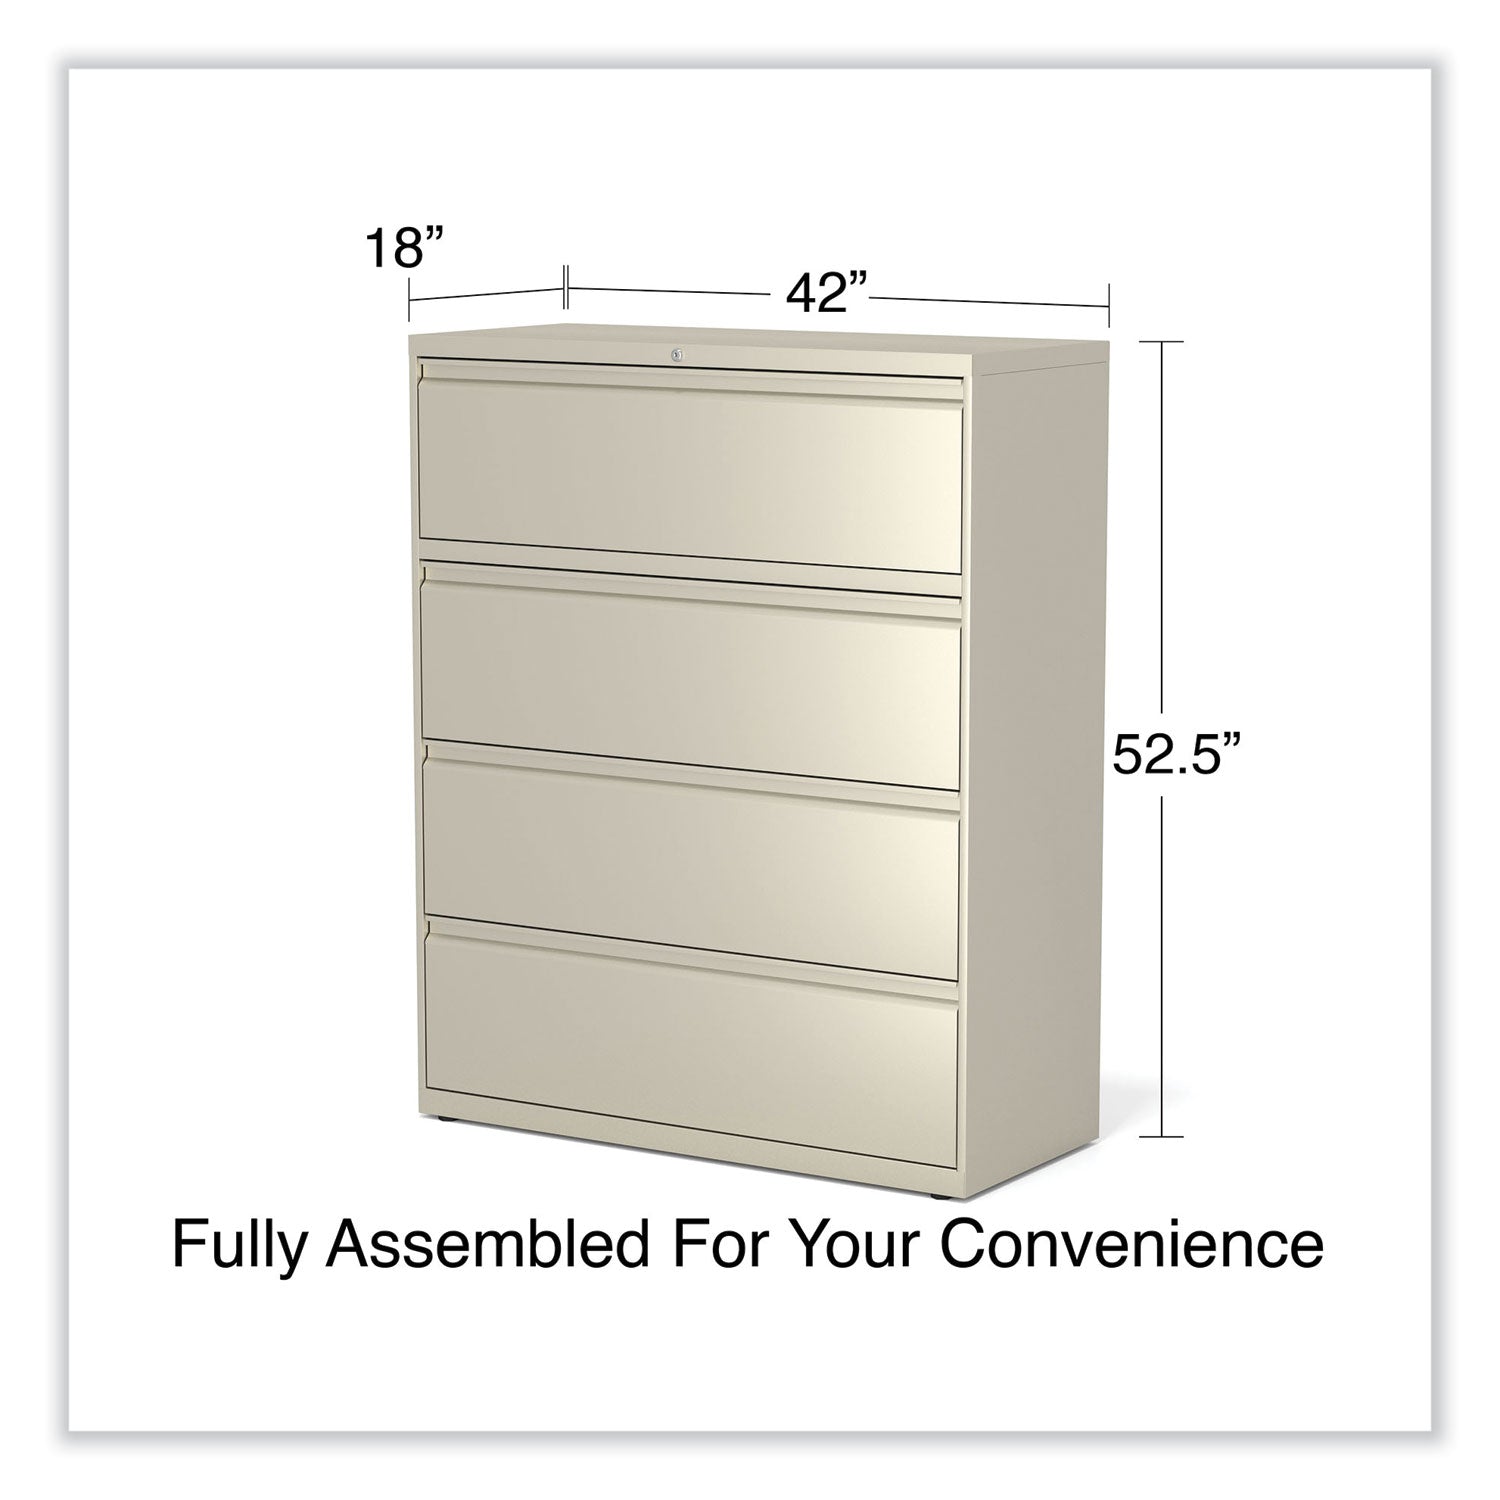 lateral-file-4-legal-letter-size-file-drawers-putty-42-x-1863-x-525_alehlf4254py - 6